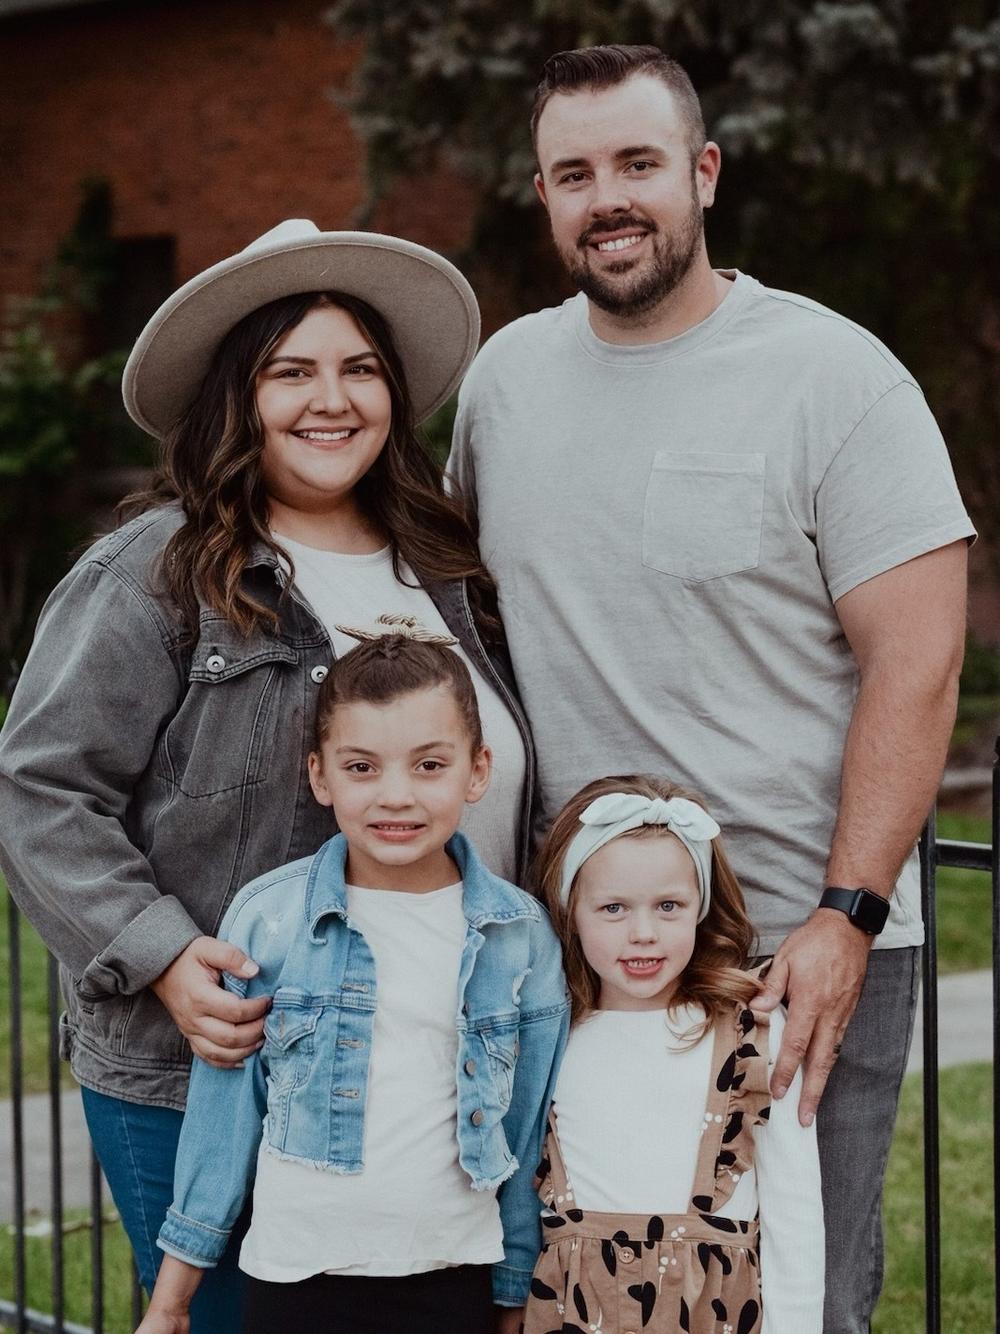 After adopting daughters Finleigh May (left) and Lennon Ivy, pastor Nathan Hornback and his wife, Audrey, advocate for other families to become foster parents.